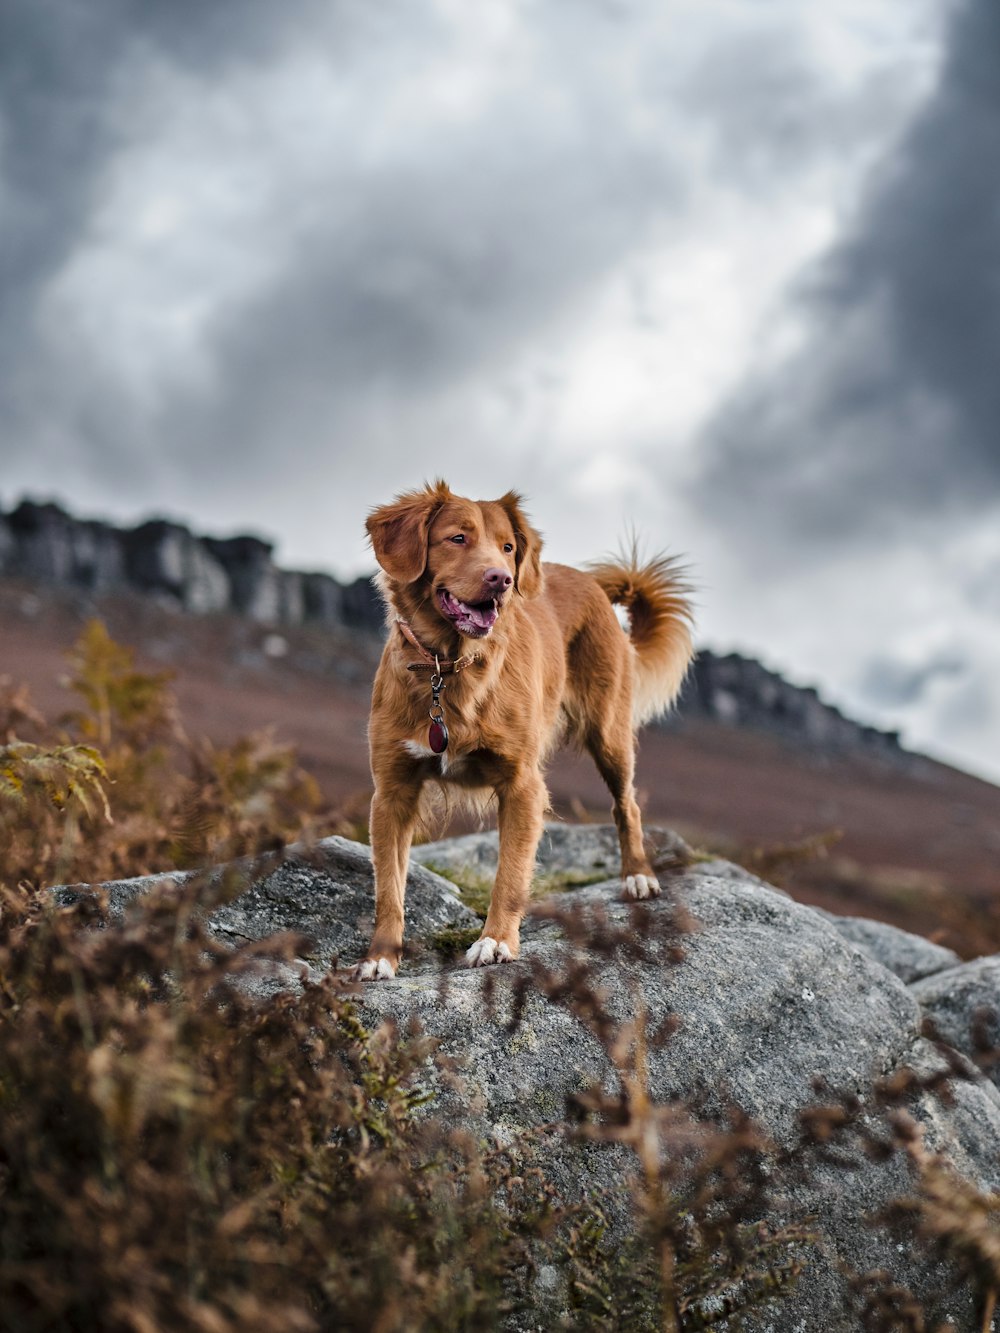 brown short coated medium sized dog on gray rock during daytime